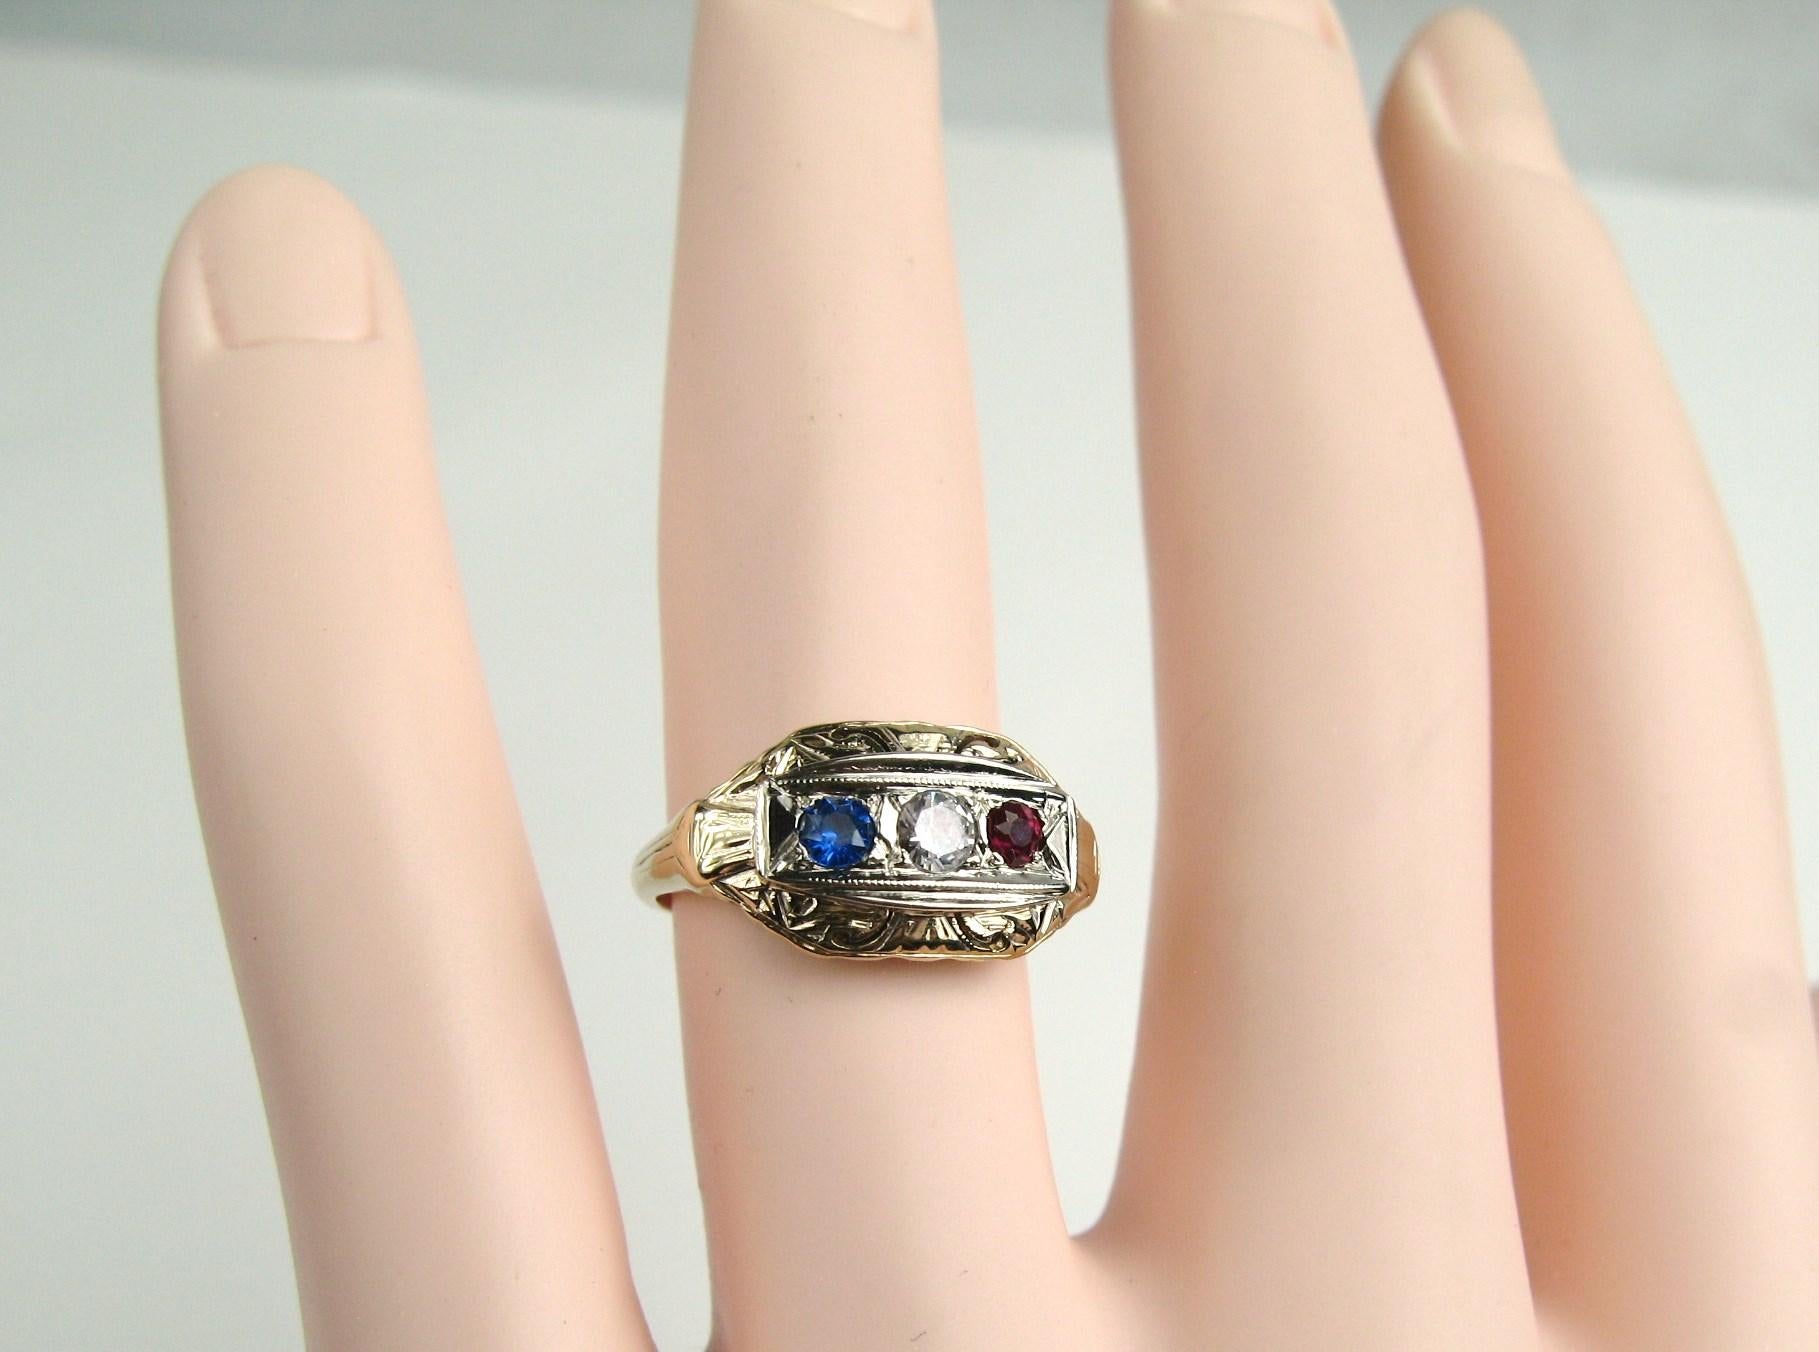 14K Gold Art Deco 3 stone ring. Red, White and Blue colored stones. This ring dates back to the Art Deco jewelry period, circa 1920-1935. Ring is a size 6. It can be sized by us or your jeweler. Be sure to check our storefront for hundreds of pieces